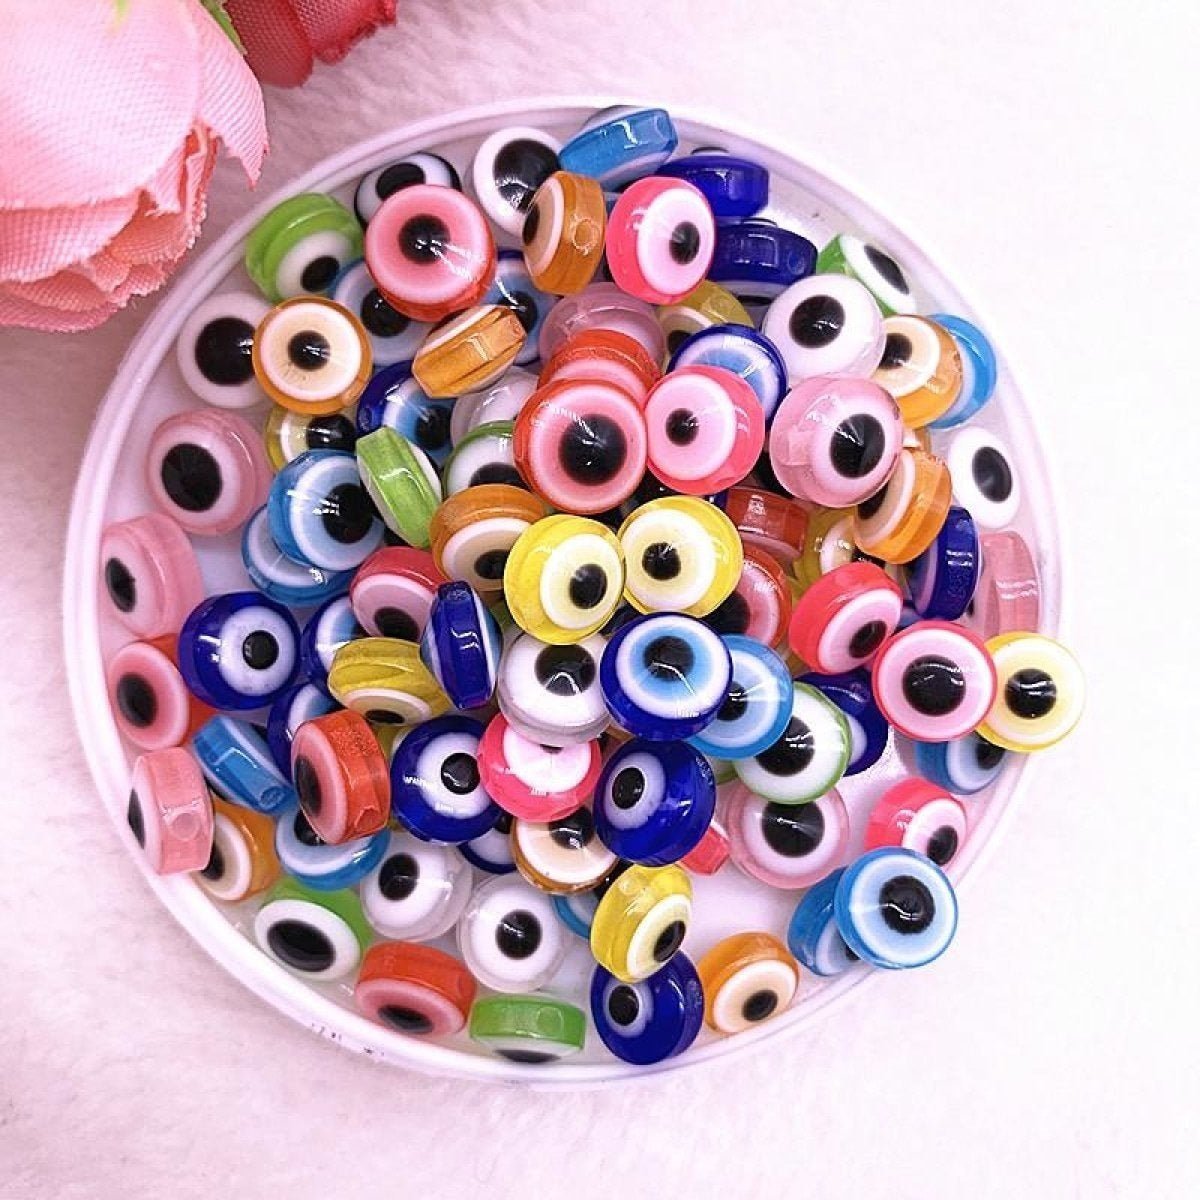 48pcs 8/10mm Resin Spacer Beads Double Sided Eyes for Jewelry Making DIY Bracelet Beads Flat Backing - Multicoloured 8mm - - Asia Sell